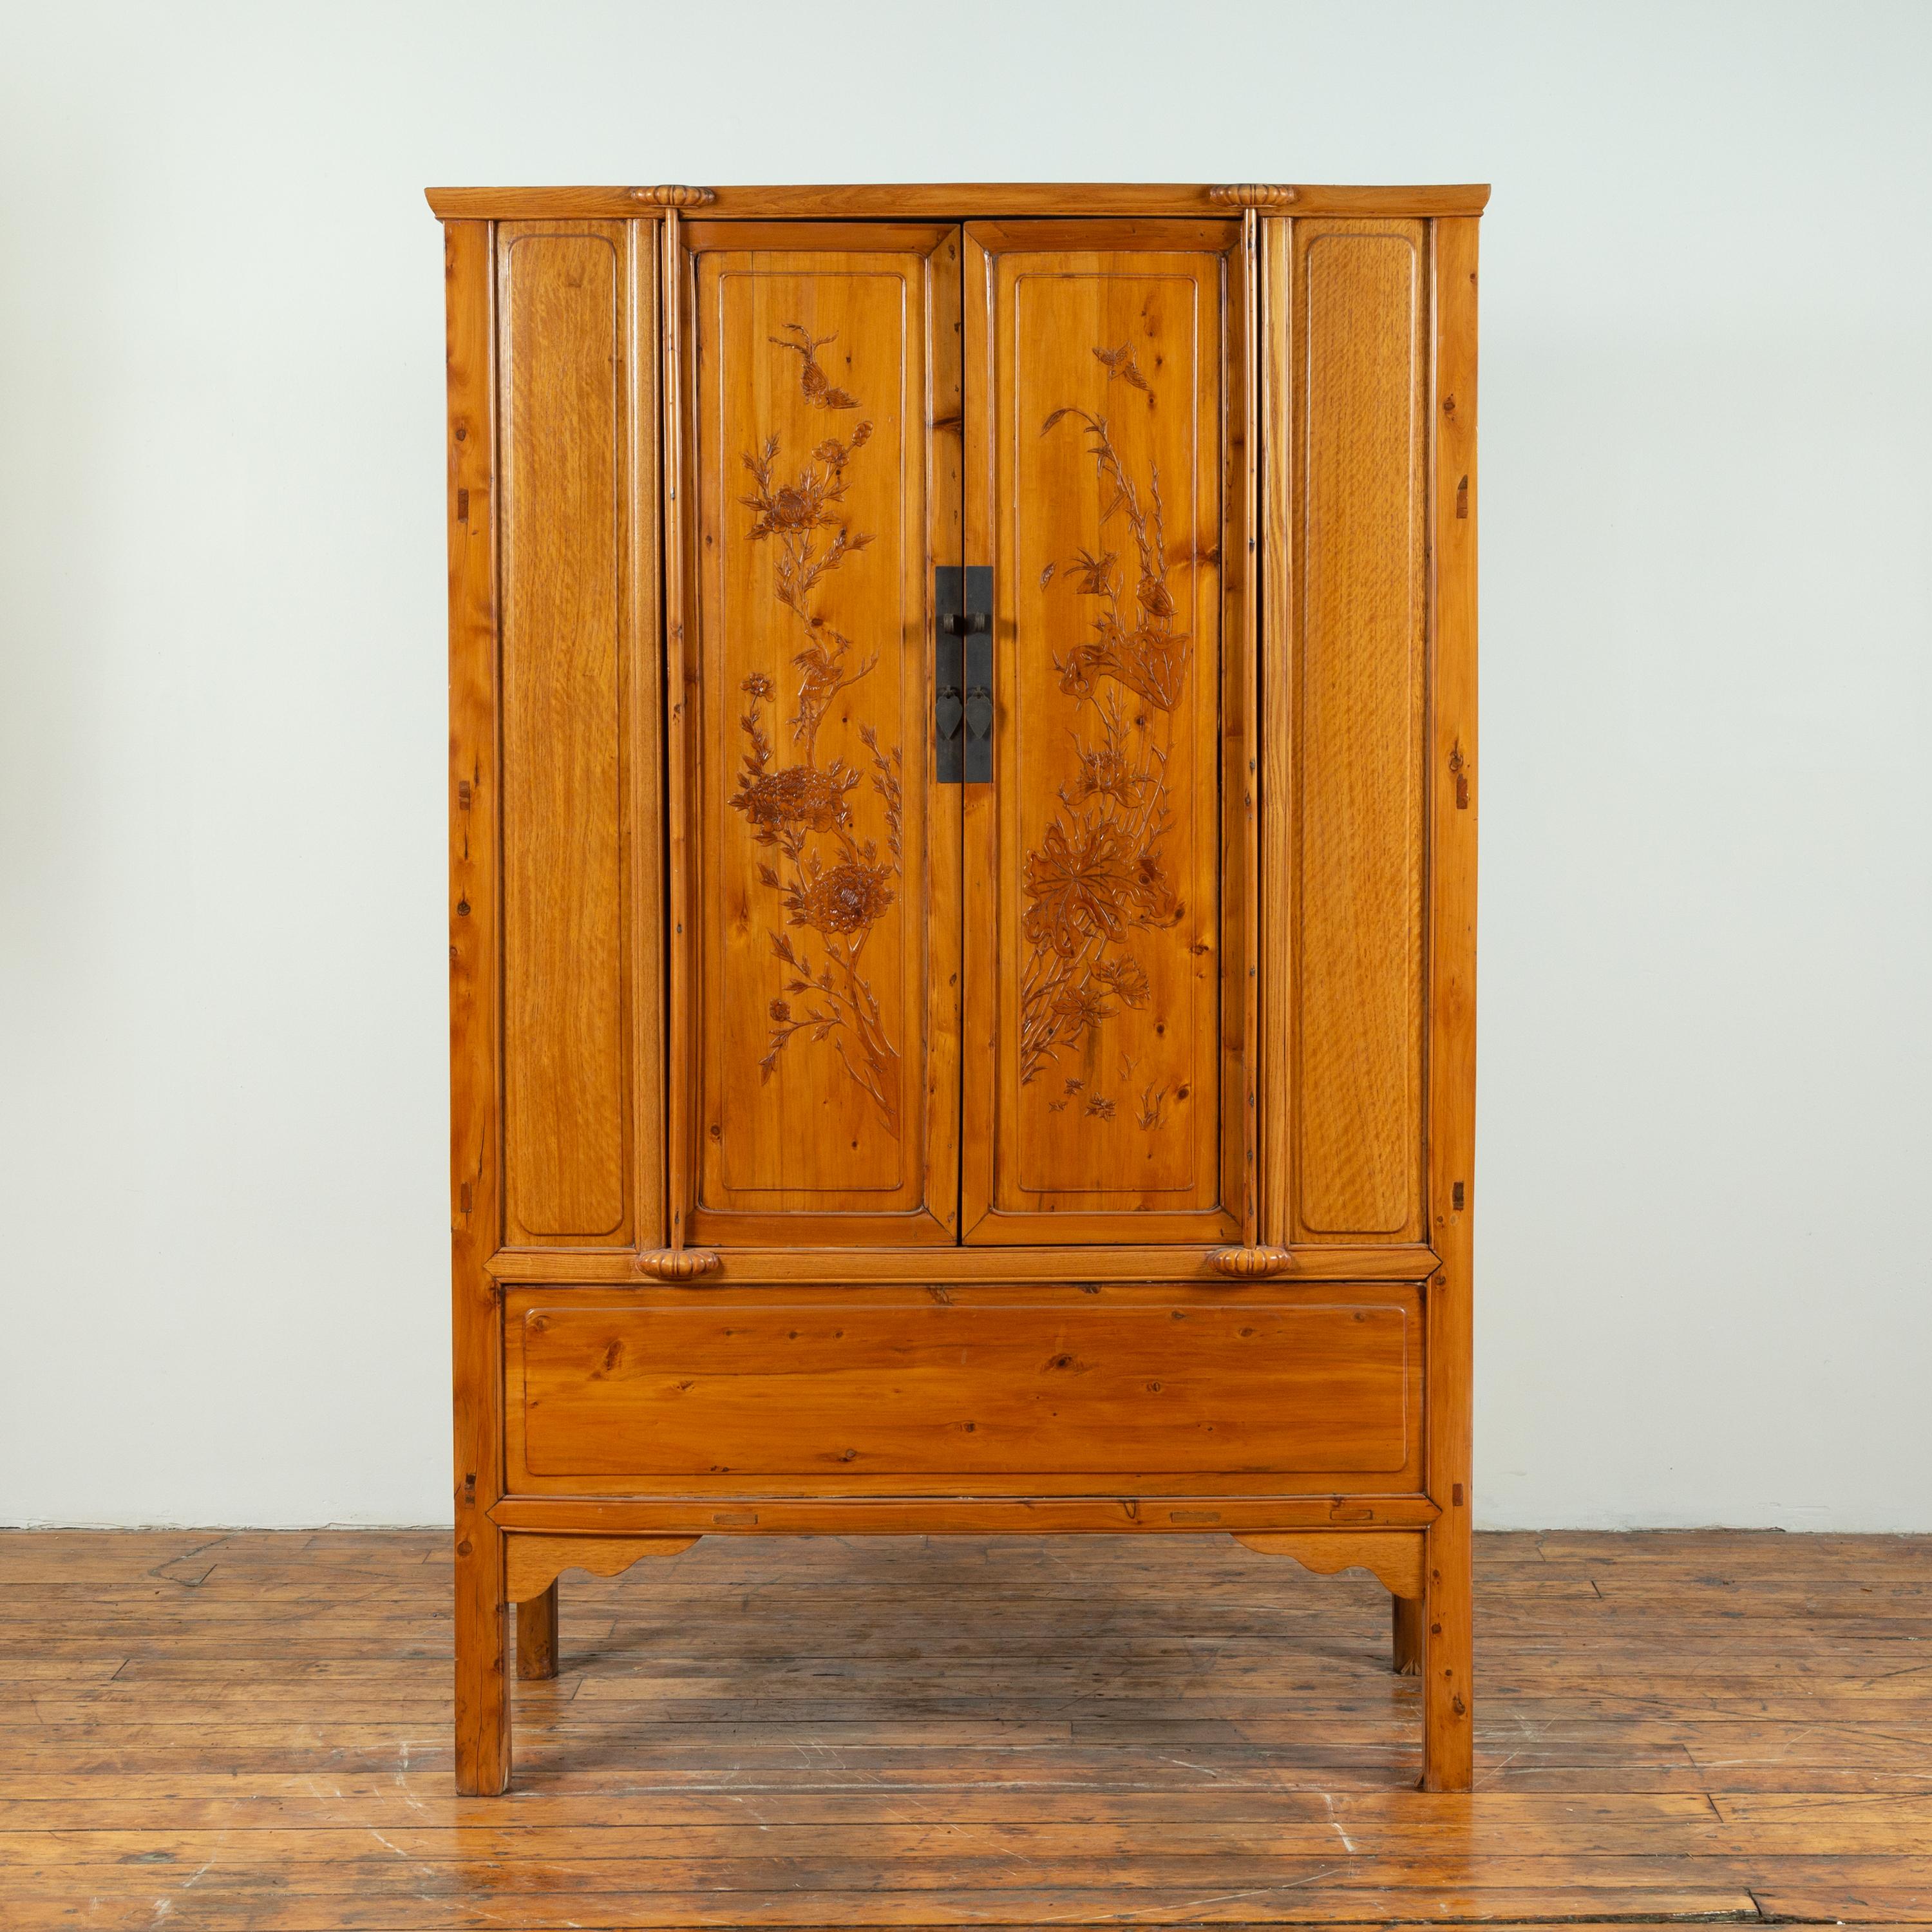 A Chinese vintage Ming Dynasty style natural wood two-door cabinet from the mid-20th century, with floral décor and hidden drawers. Born in China during the midcentury period, this exquisite wooden cabinet features a clean silhouette, perfectly